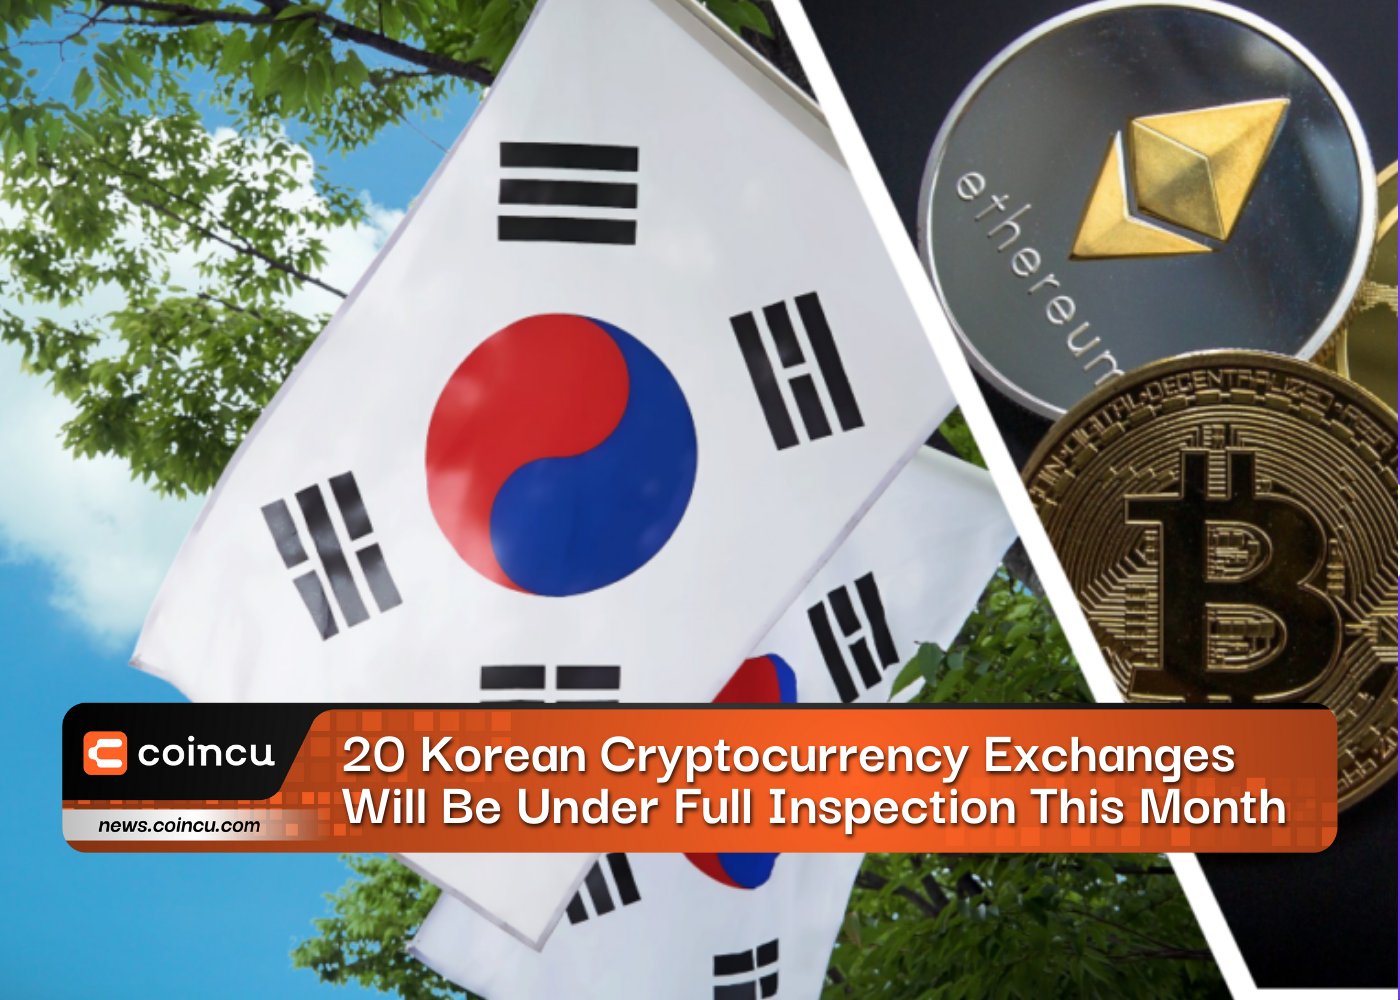 20 Korean Cryptocurrency Exchanges Will Be Under Full Inspection This Month